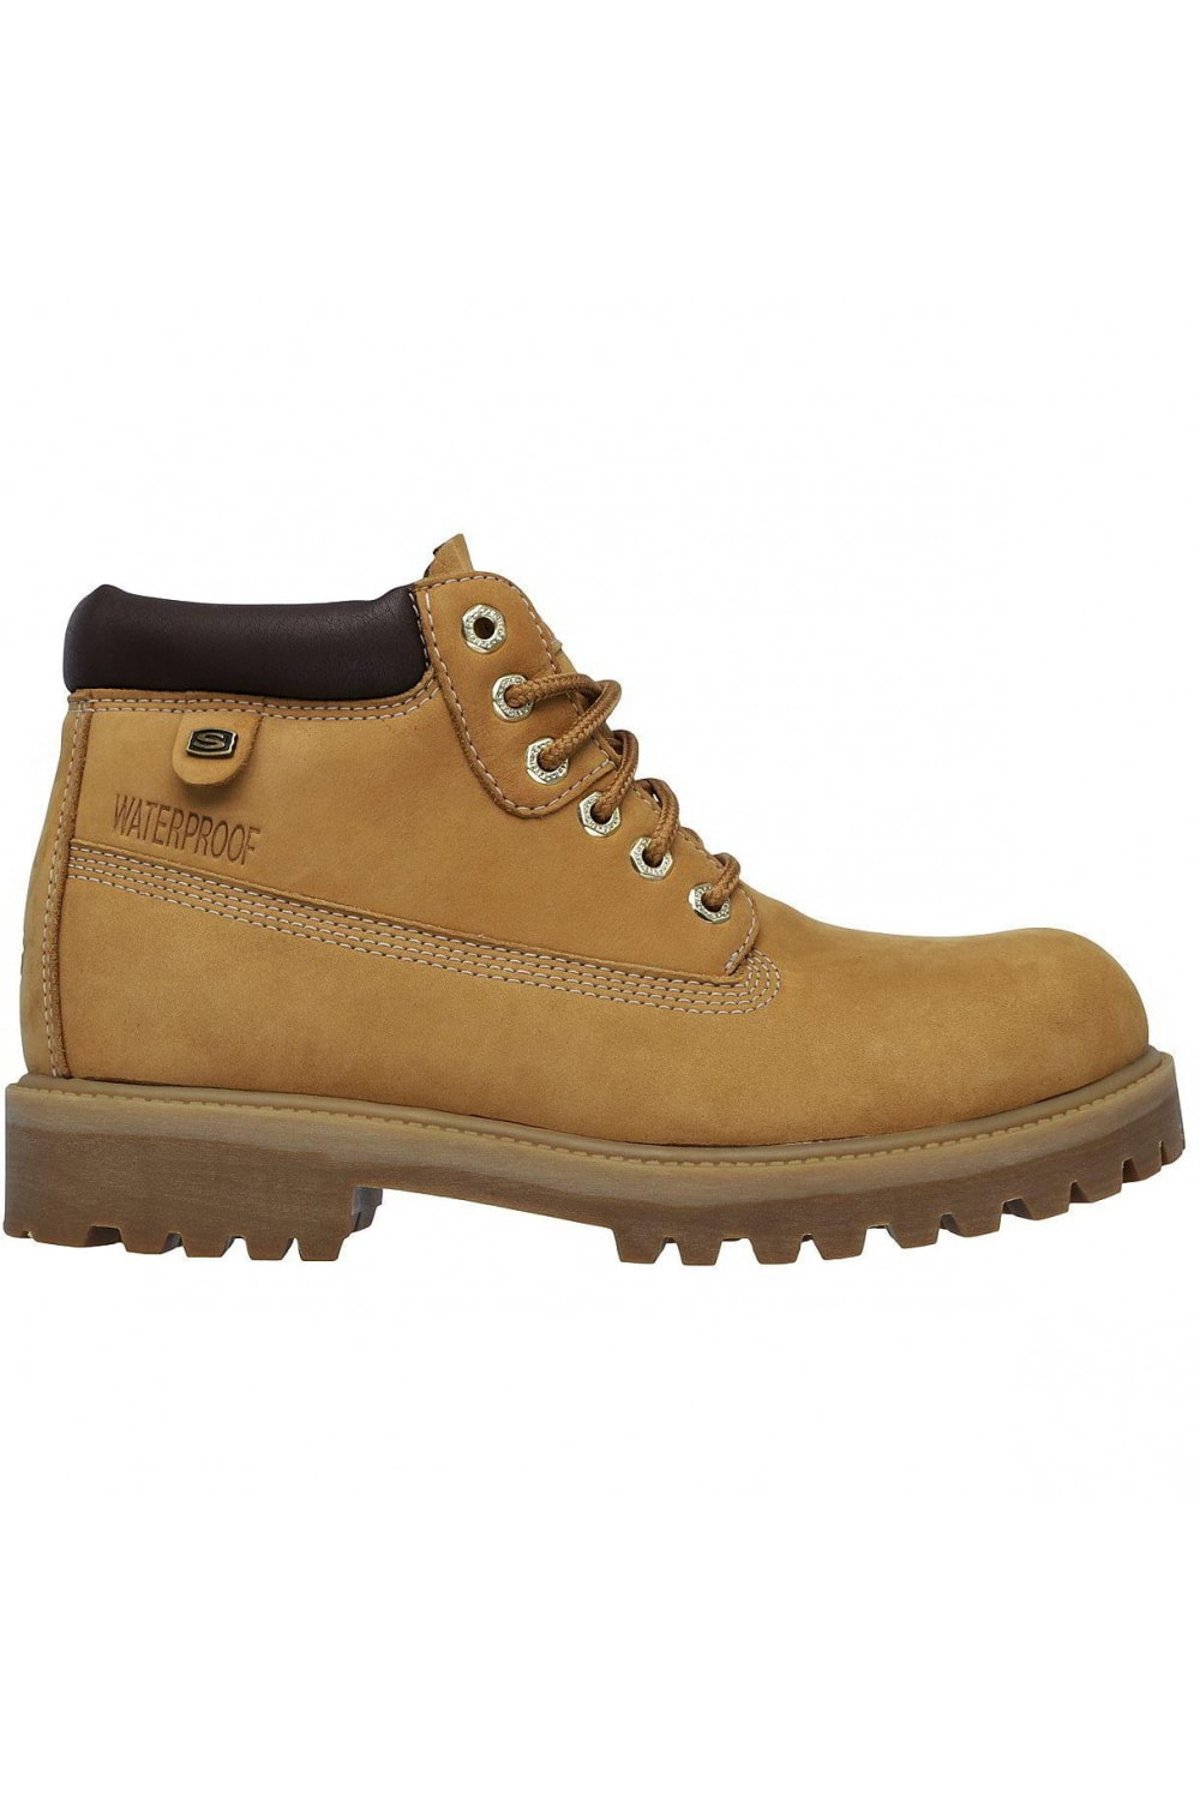 trembling Instruct nice to meet you Skechers Wheat Mens Sargents Verdict Boots - Wheat | Verishop